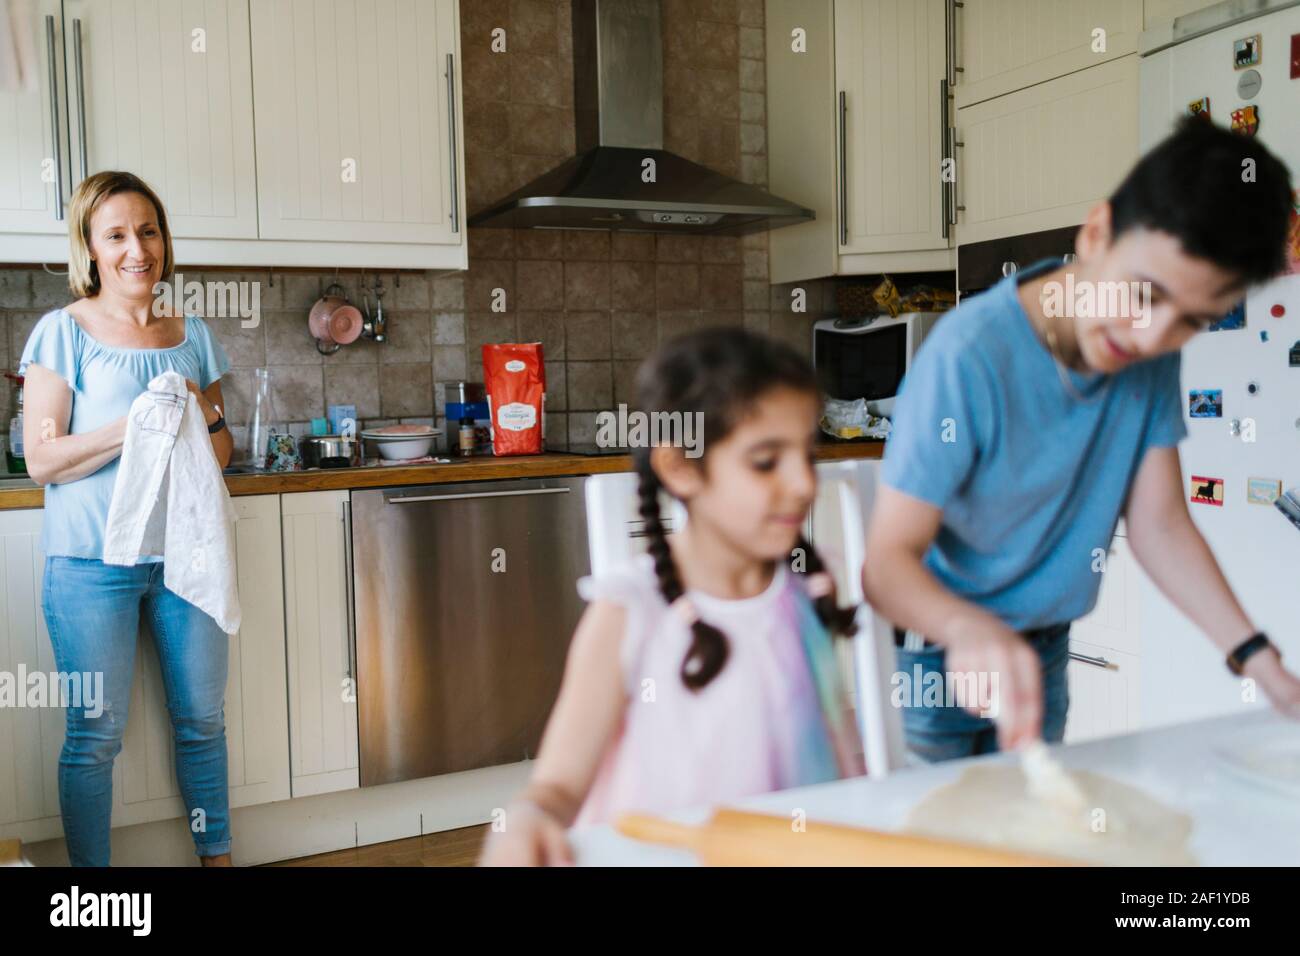 Mother looking at children in kitchen Stock Photo